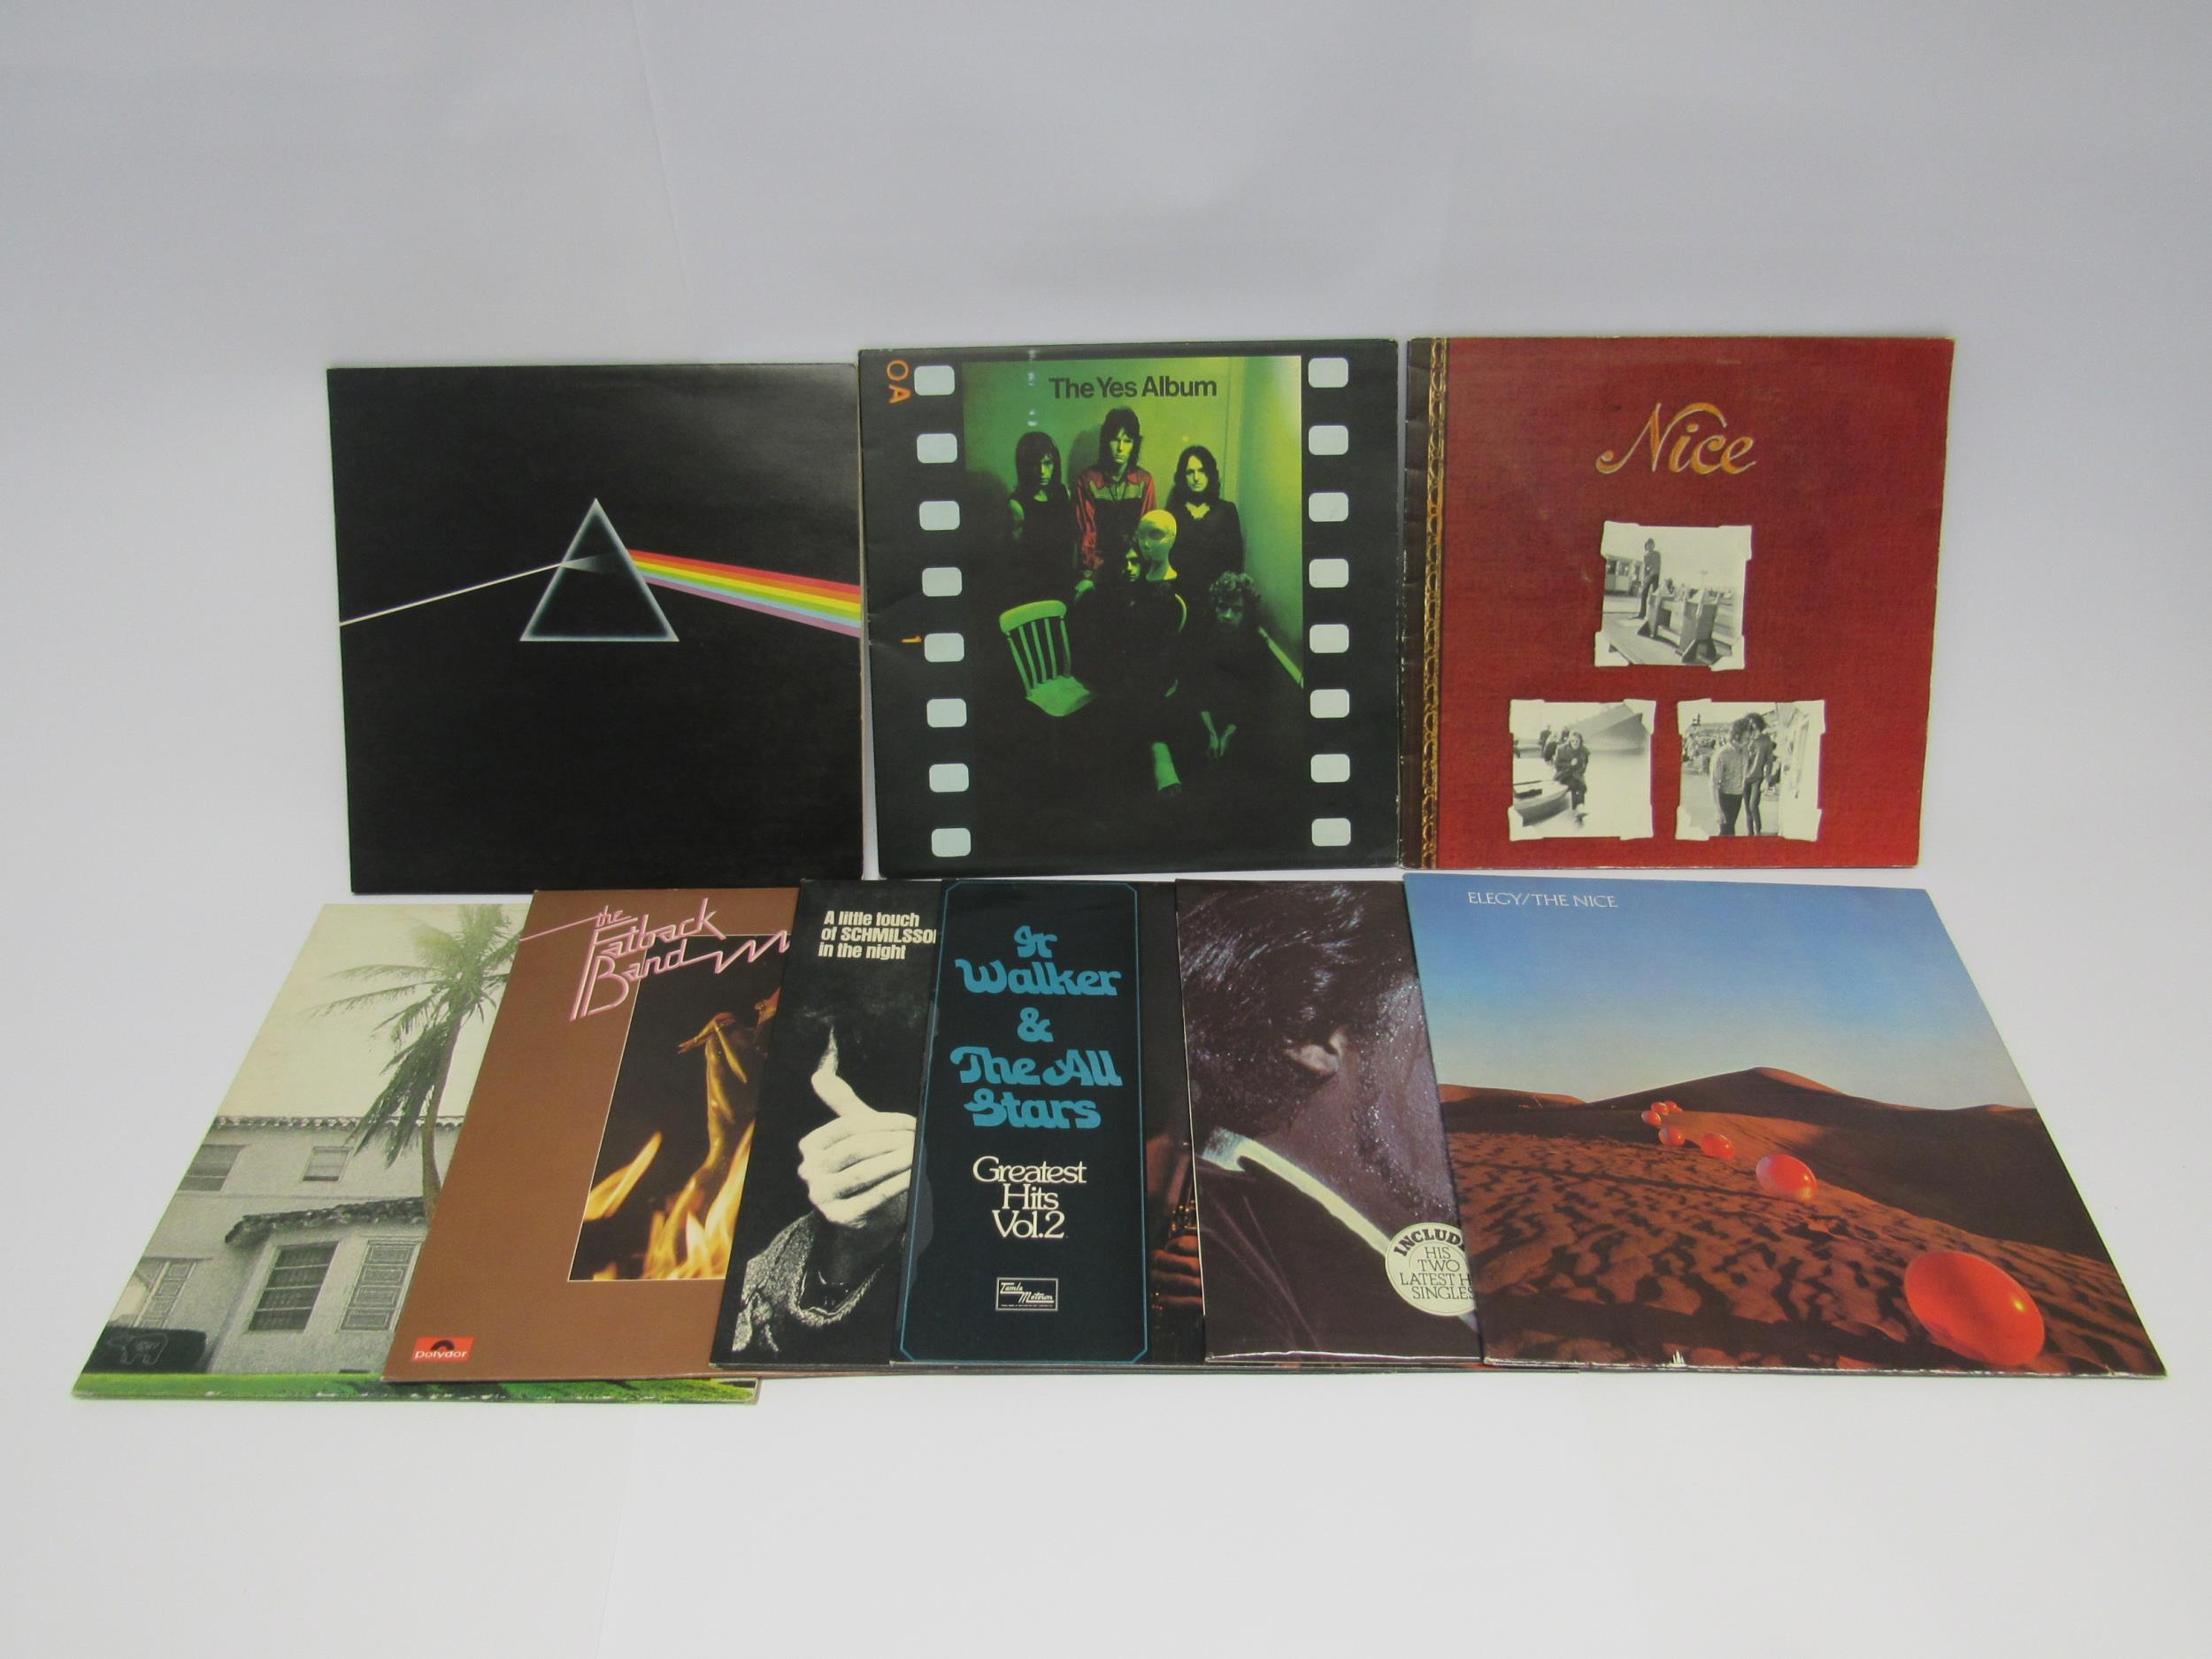 A small collection of mixed LP's to include Pink Floyd, Yes, Eric Clapton, The Nice, The Fatback